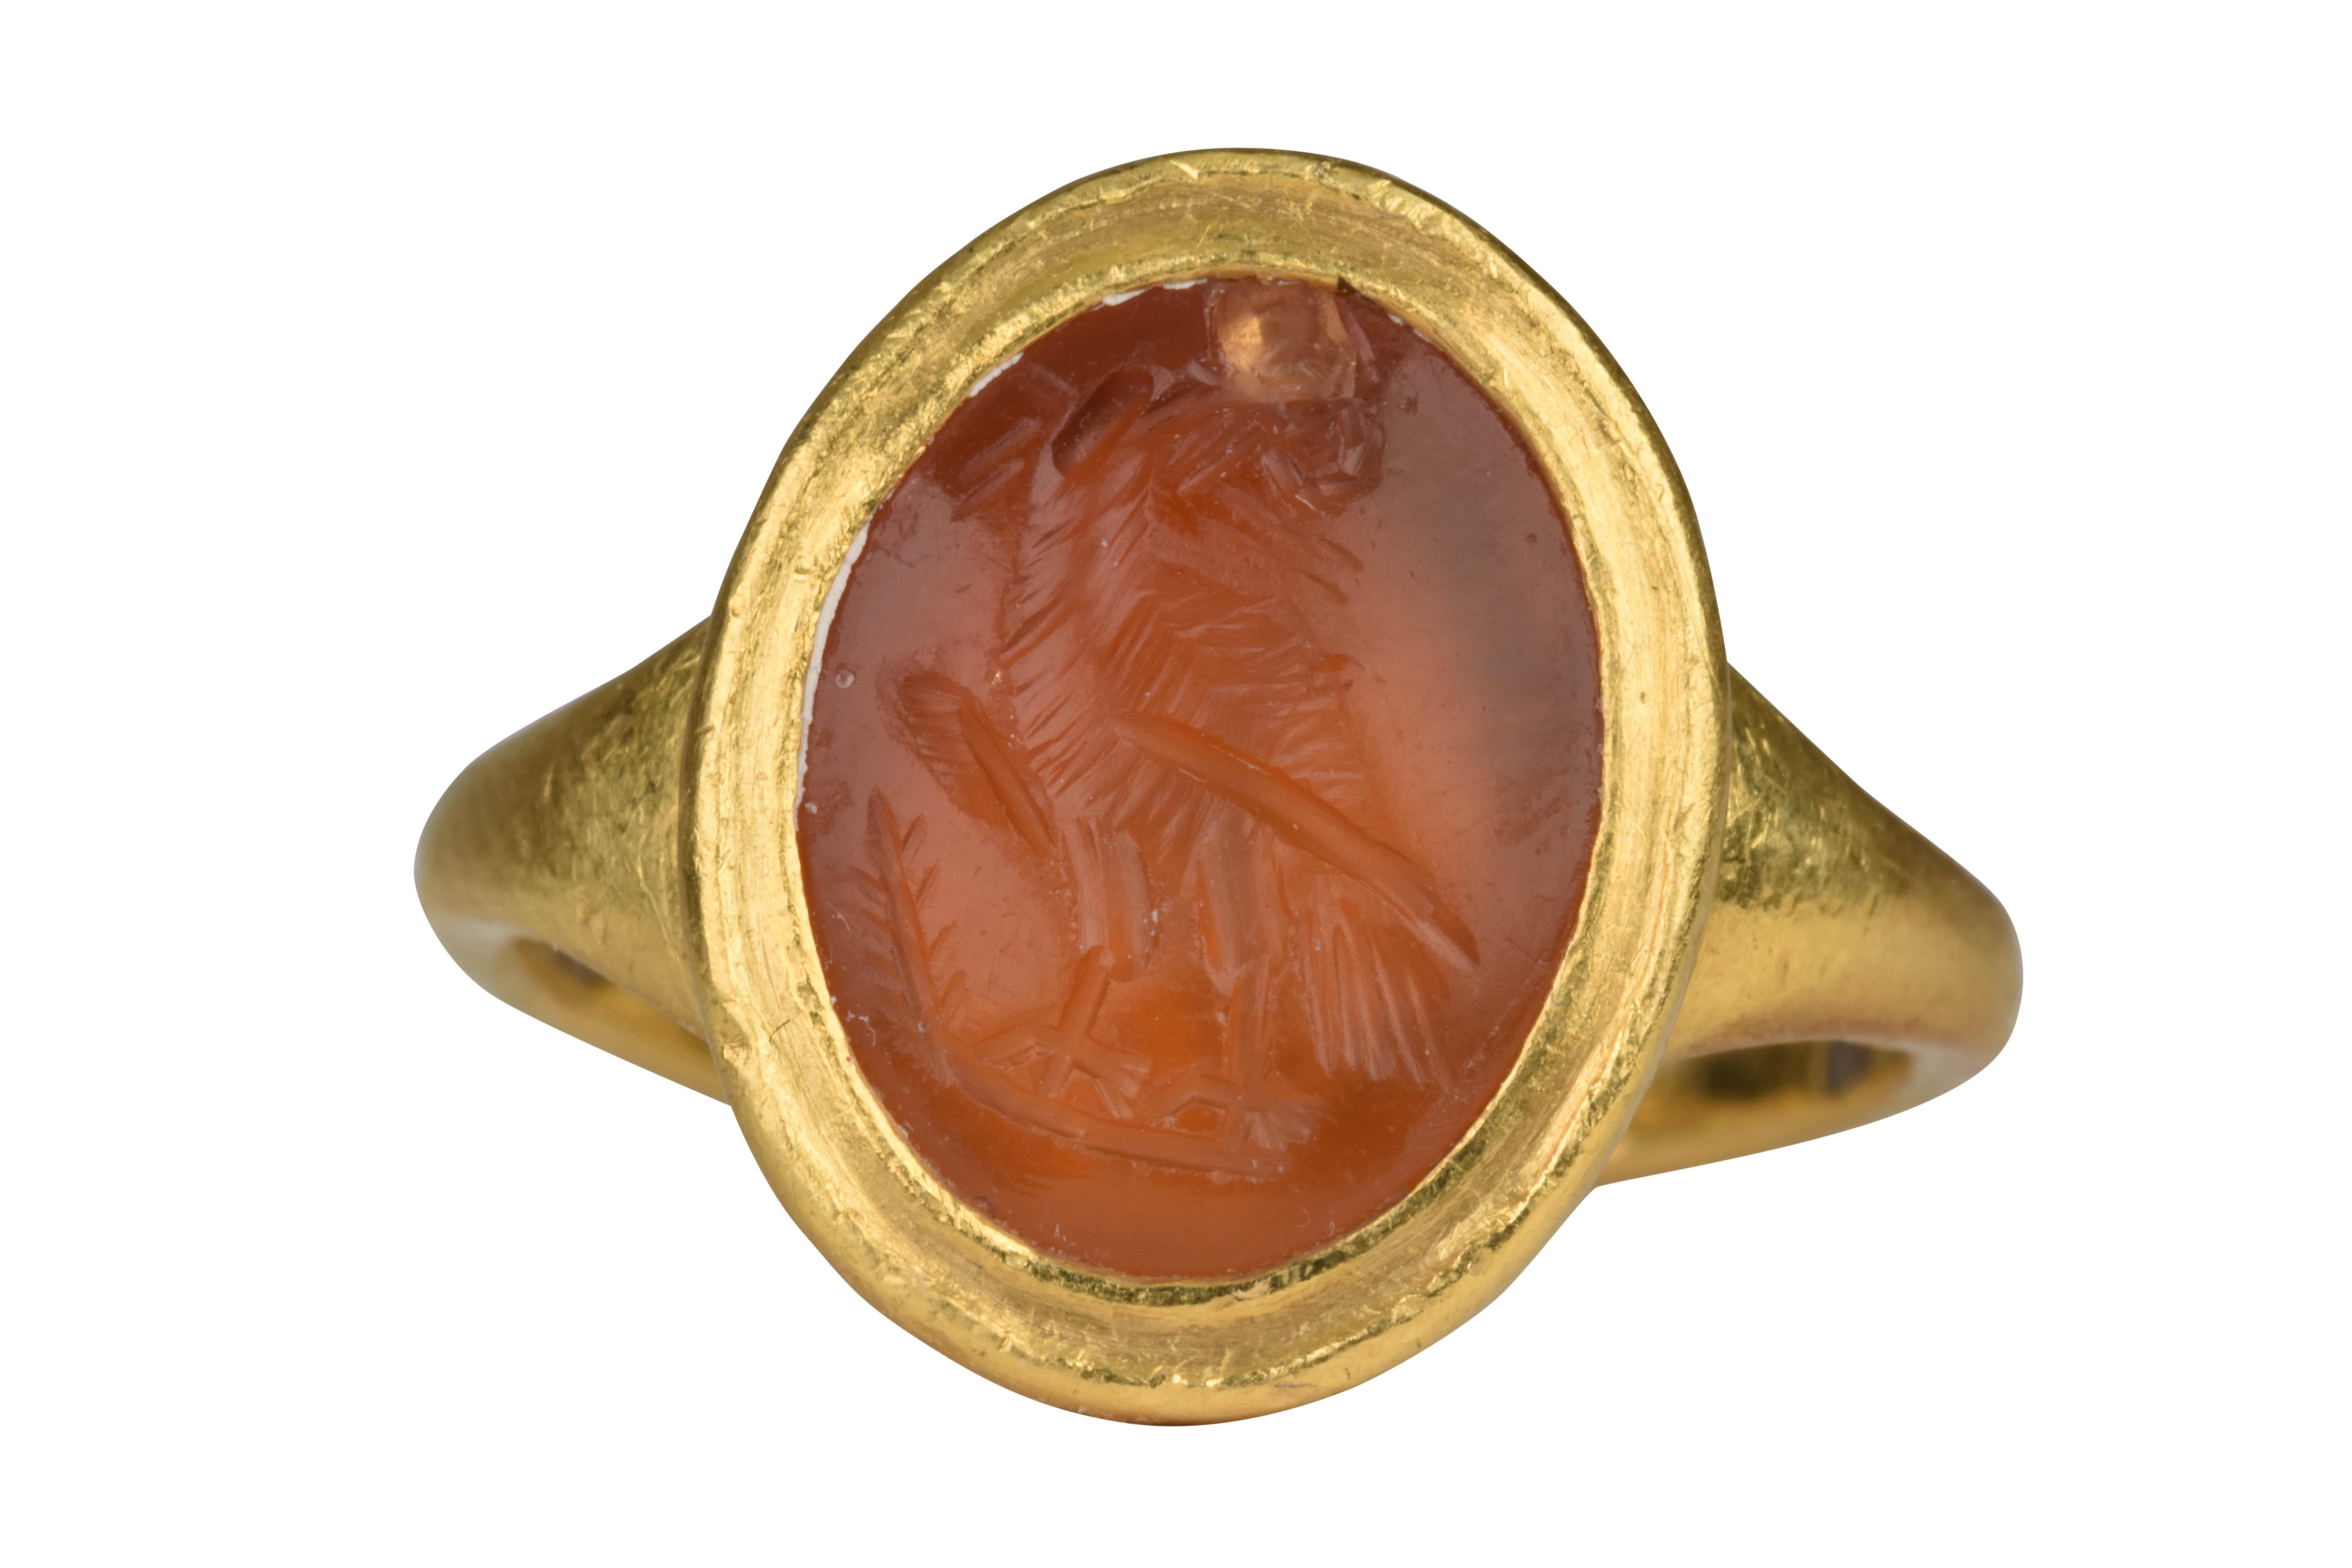 Roman Eagle Ring - 2 For Sale on 1stDibs